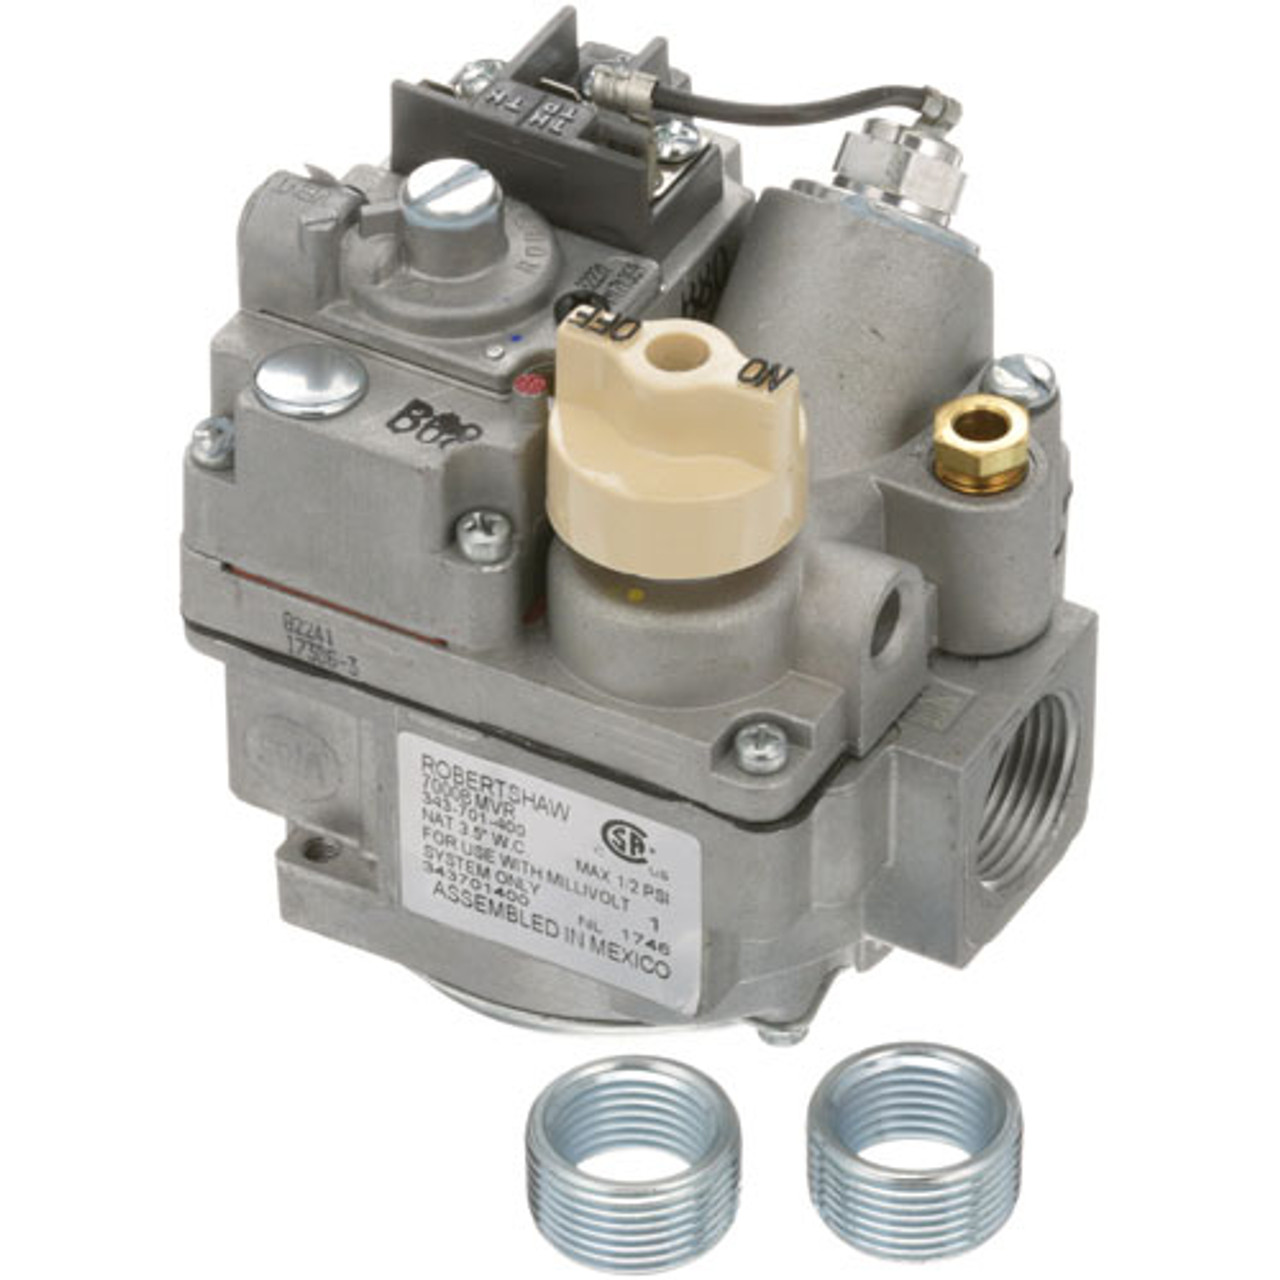 Gas Control - Replacement Part For Cecilware GML347F